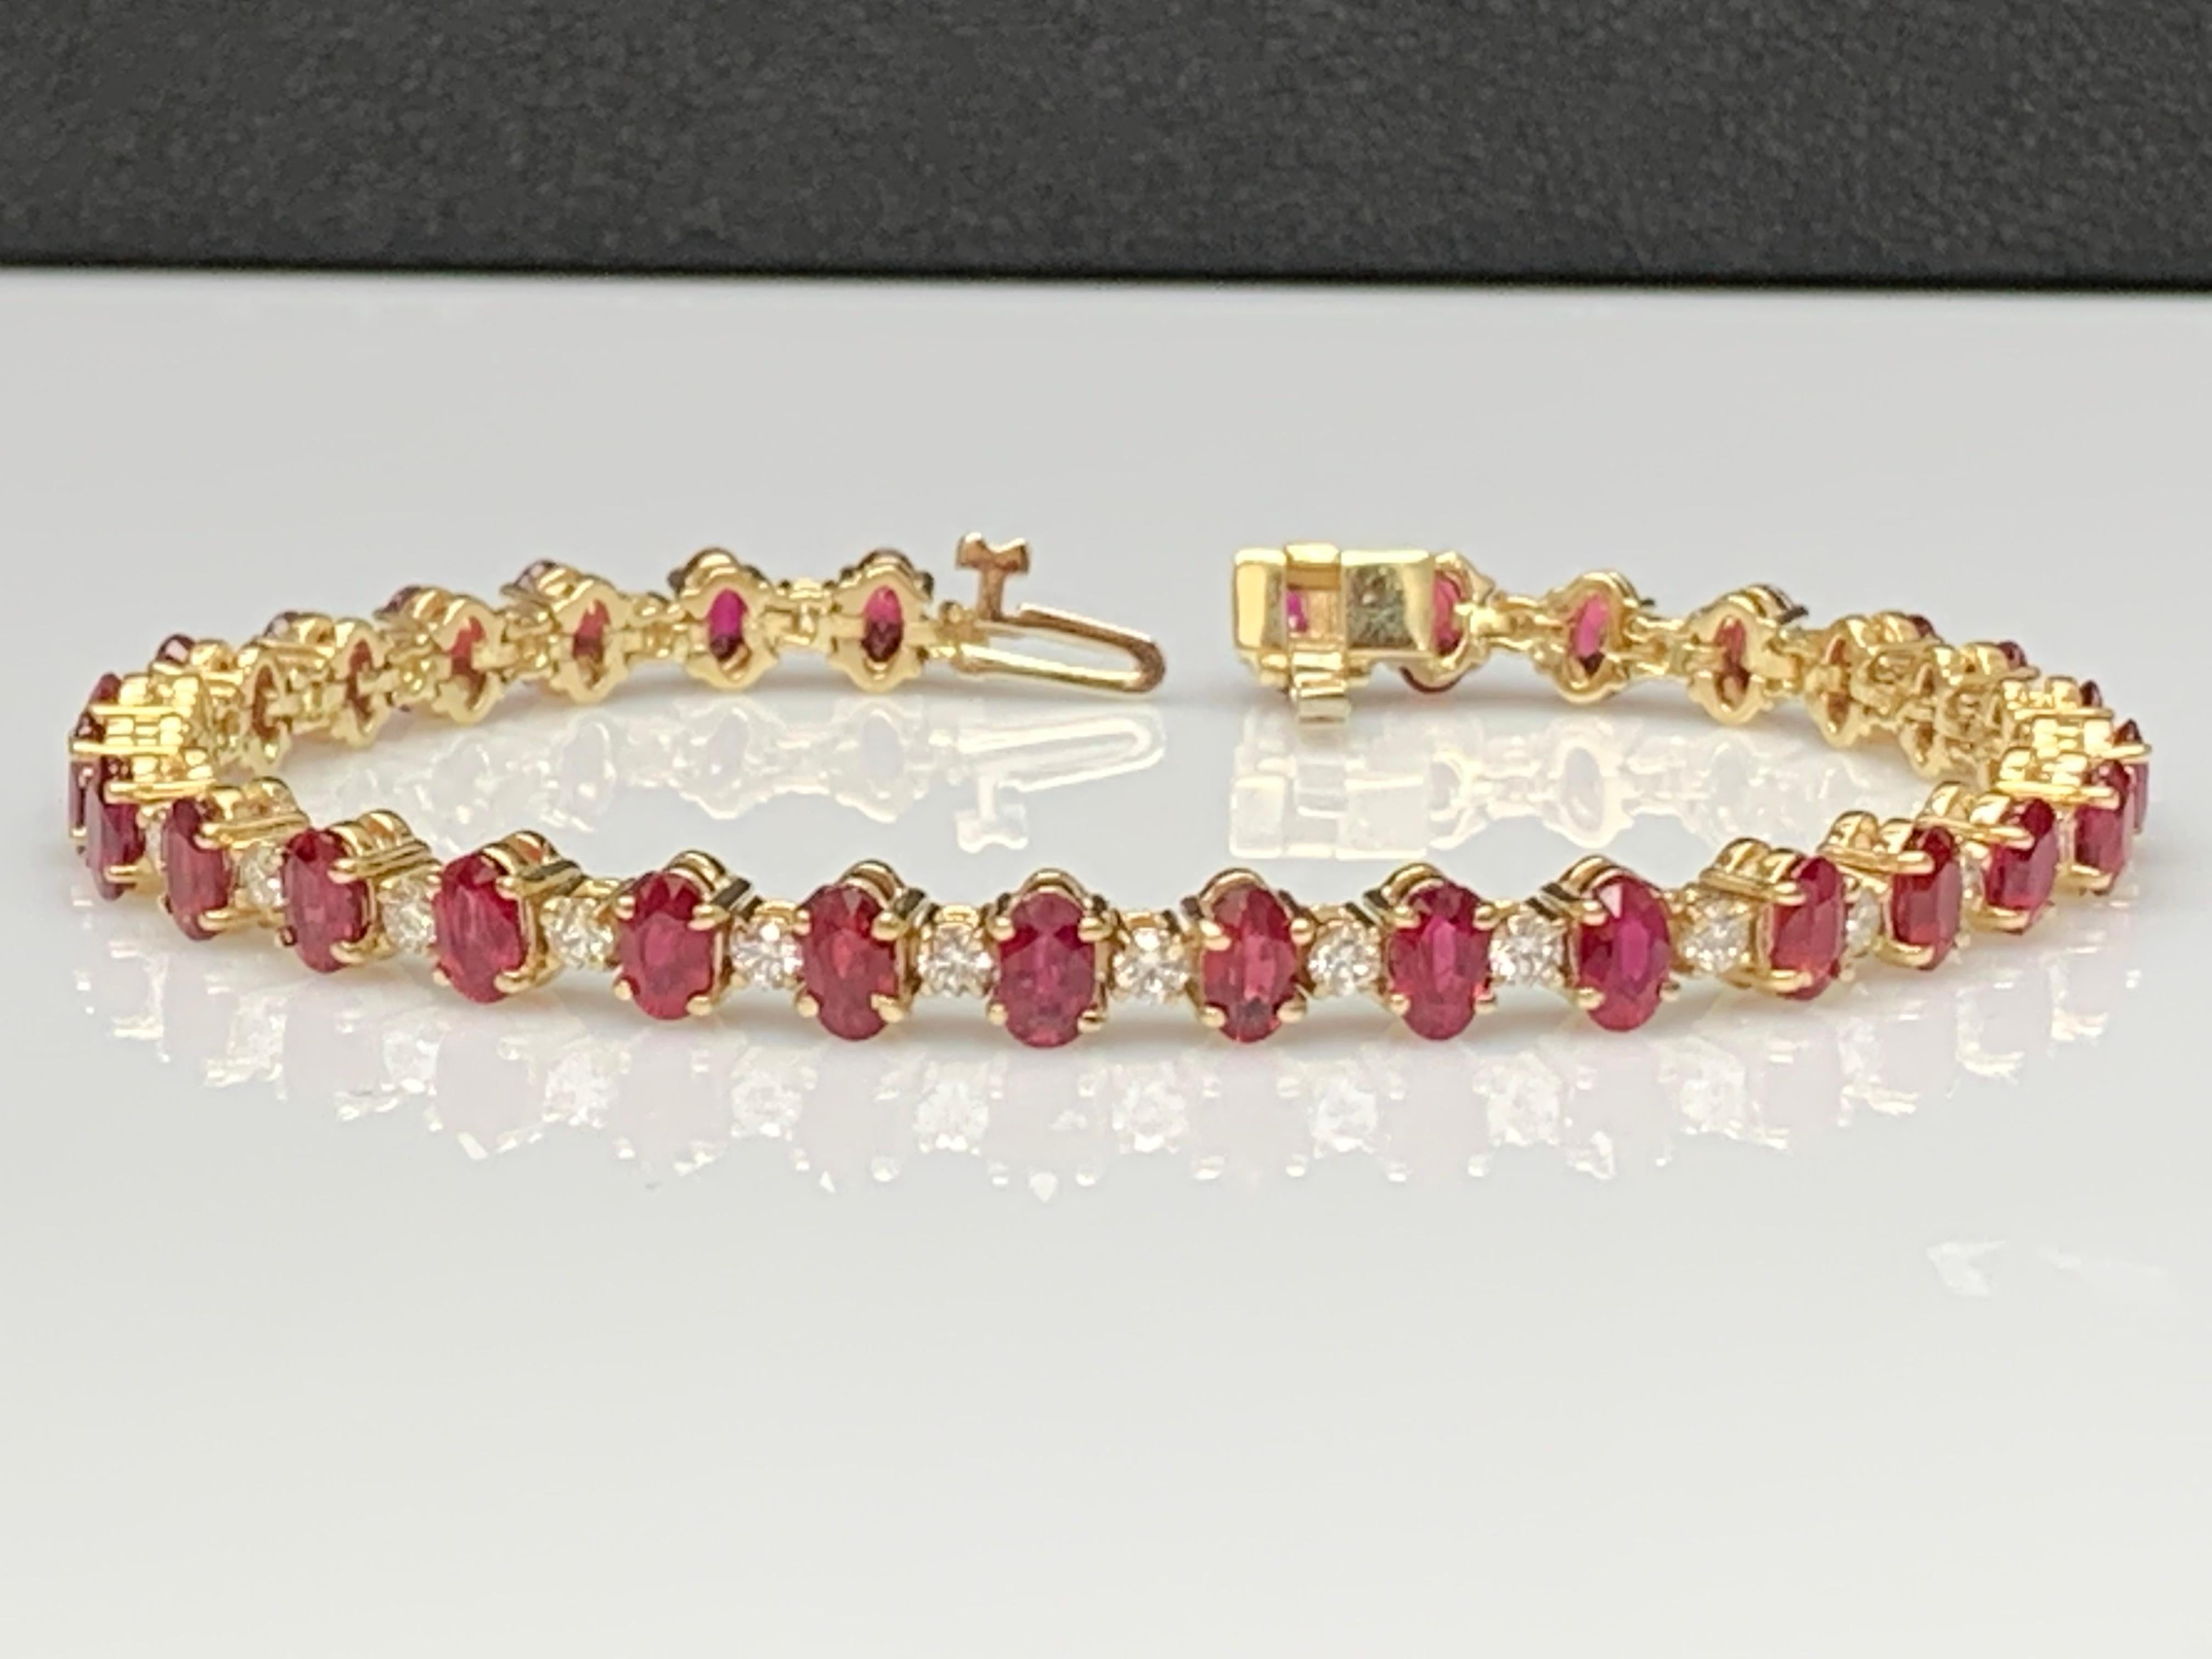 Grandeur 9.27 Carats Oval Cut Ruby and Diamond Bracelet in 14k Yellow Gold For Sale 6